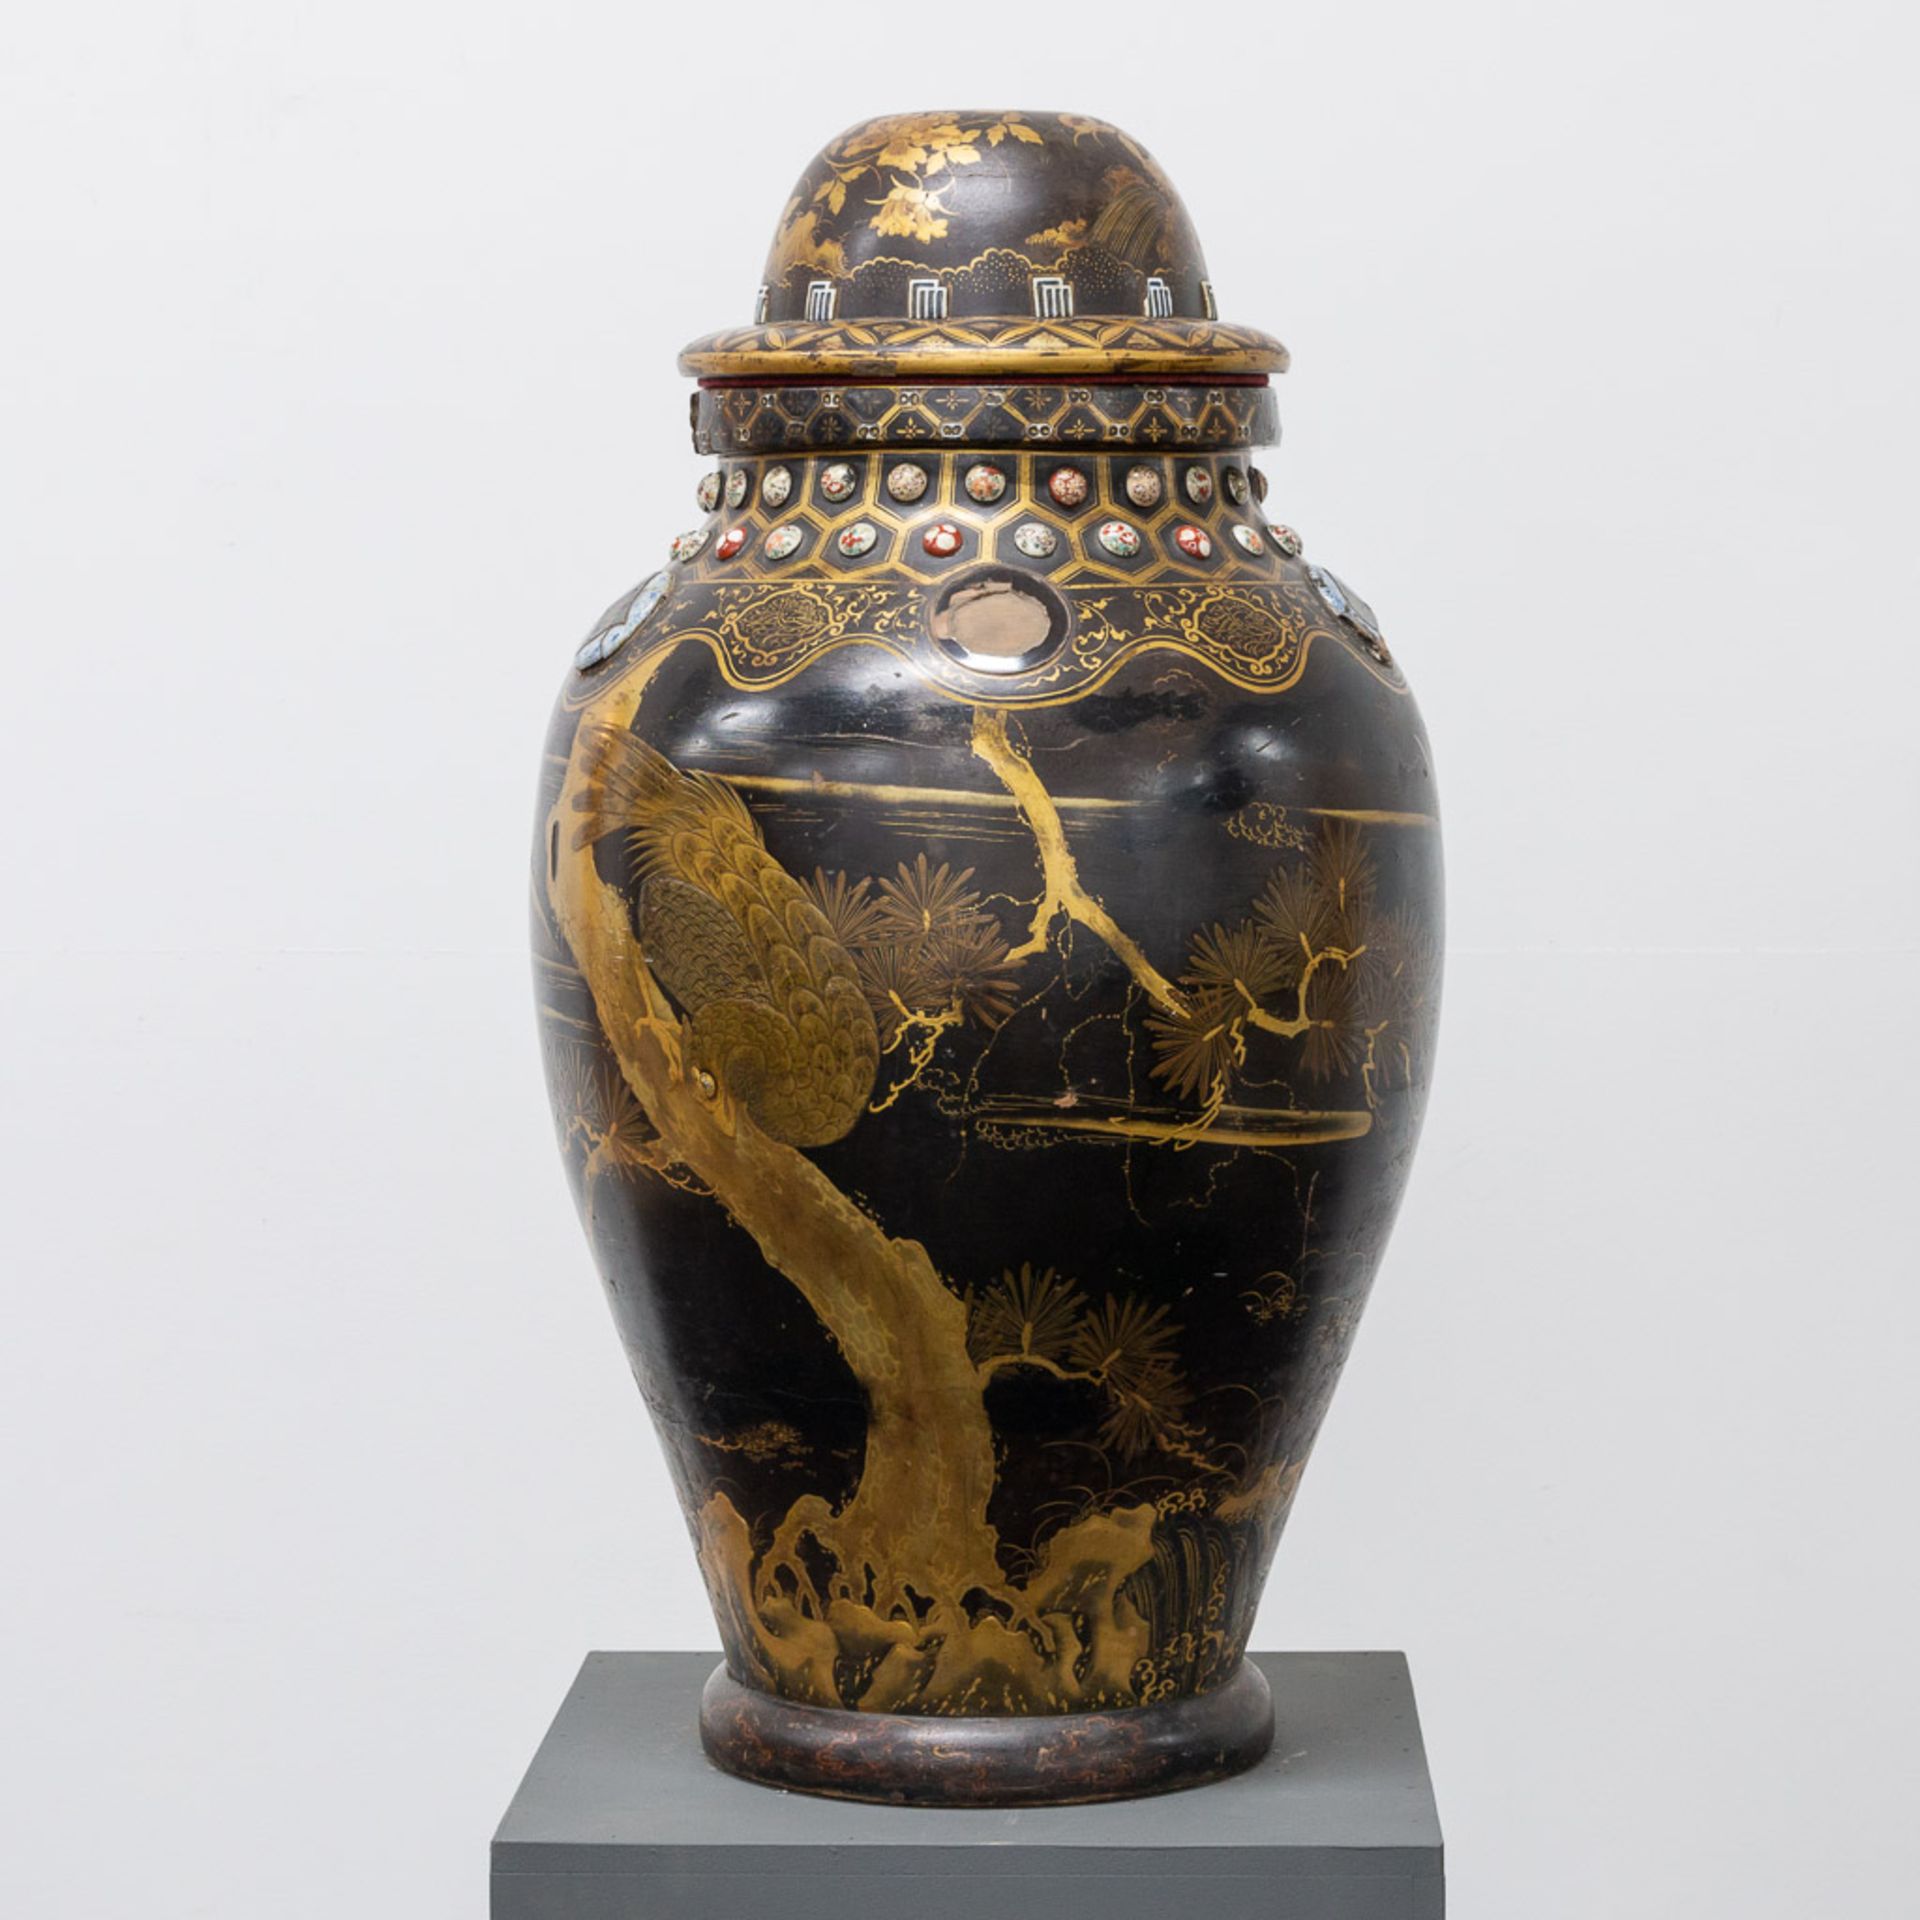 A large Japanese display vase, made of terracotta combined with wood. - Image 3 of 38